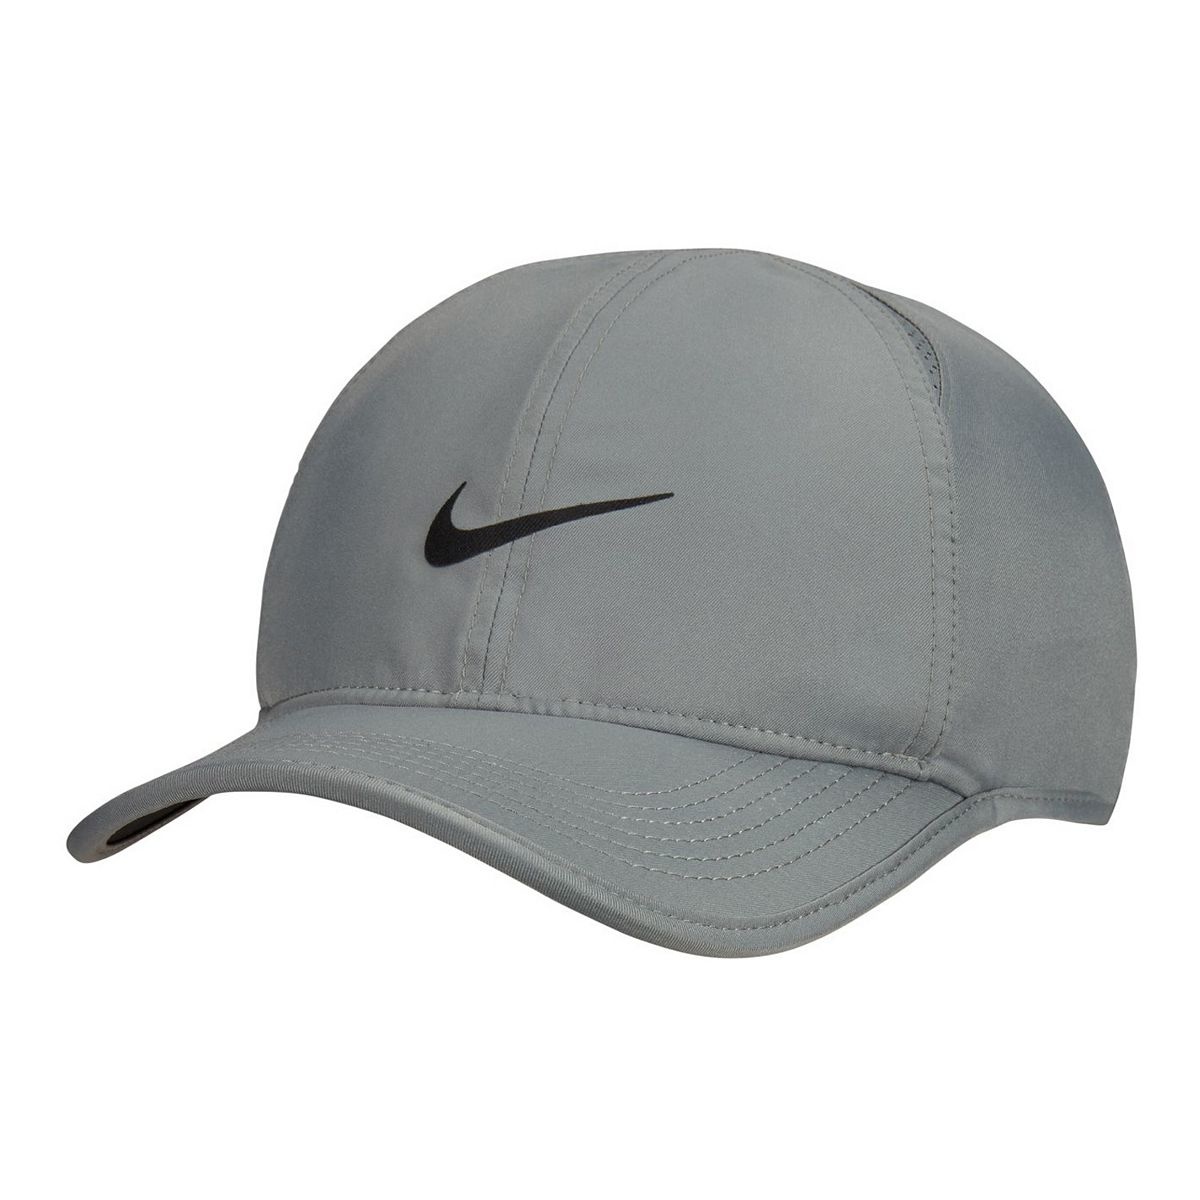 Featherlight Cap Particle Grey Adult - Tennis Topia - Sale Prices and Service in Tennis